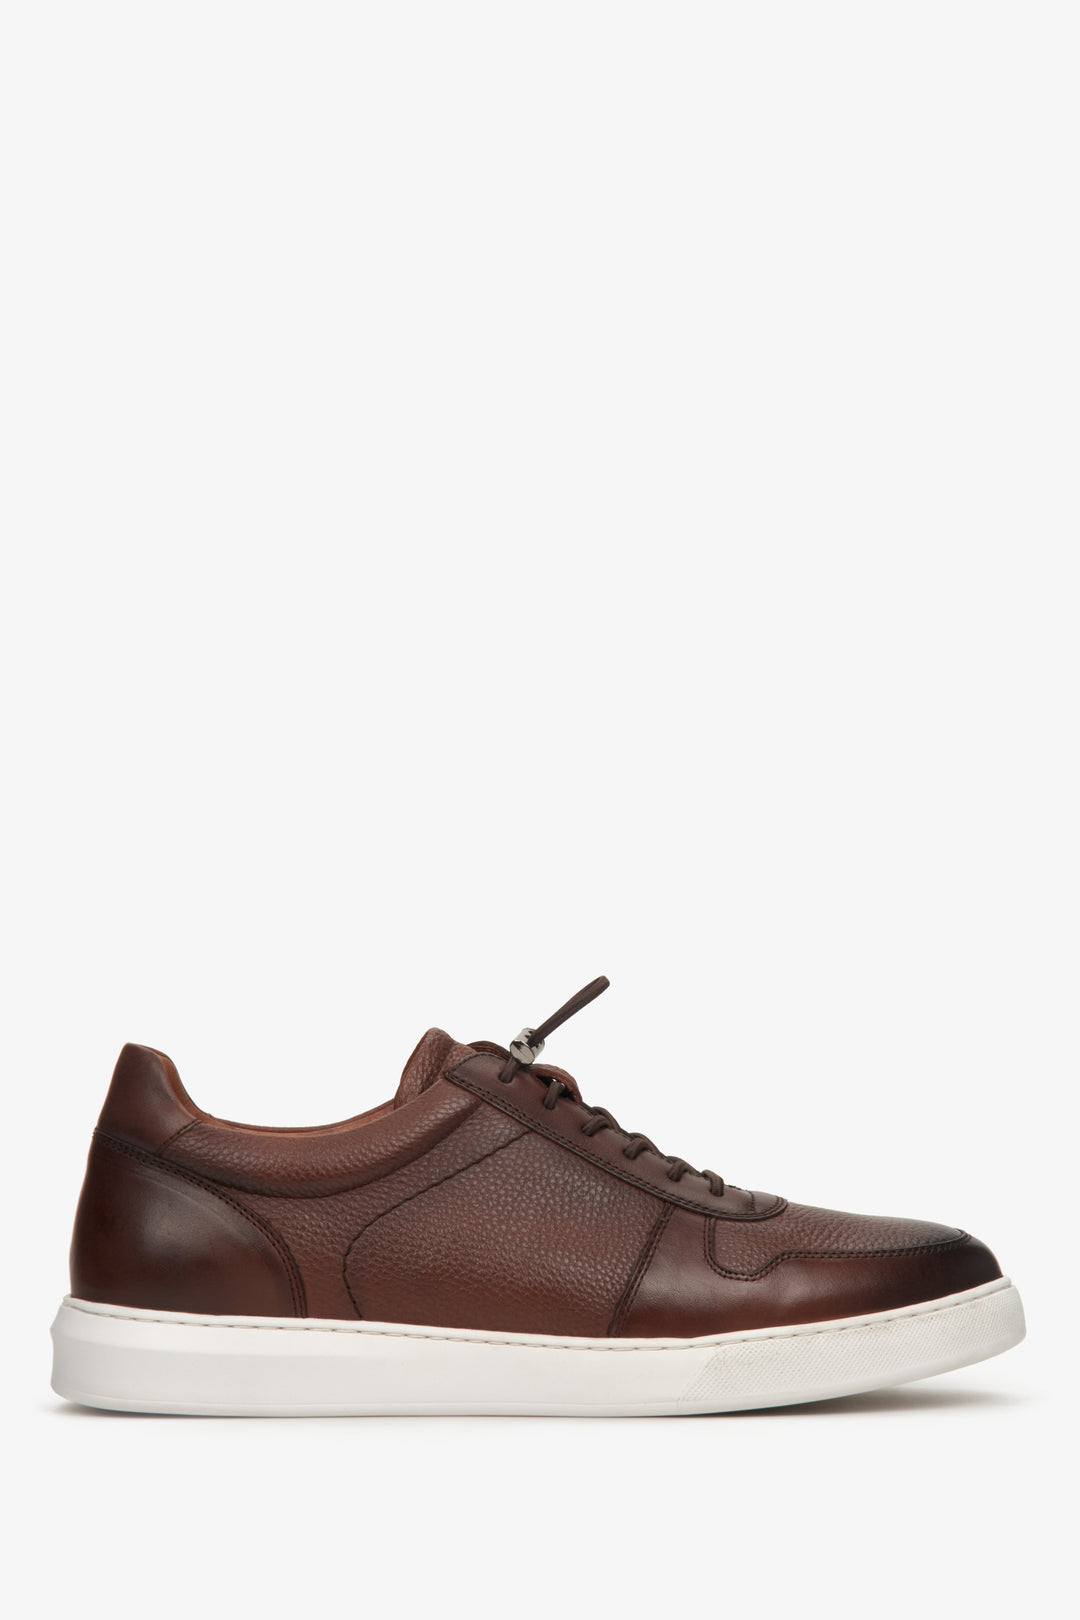 Men's Brown Leather Sneakers with an Elastic Cuff Estro ER00112577.